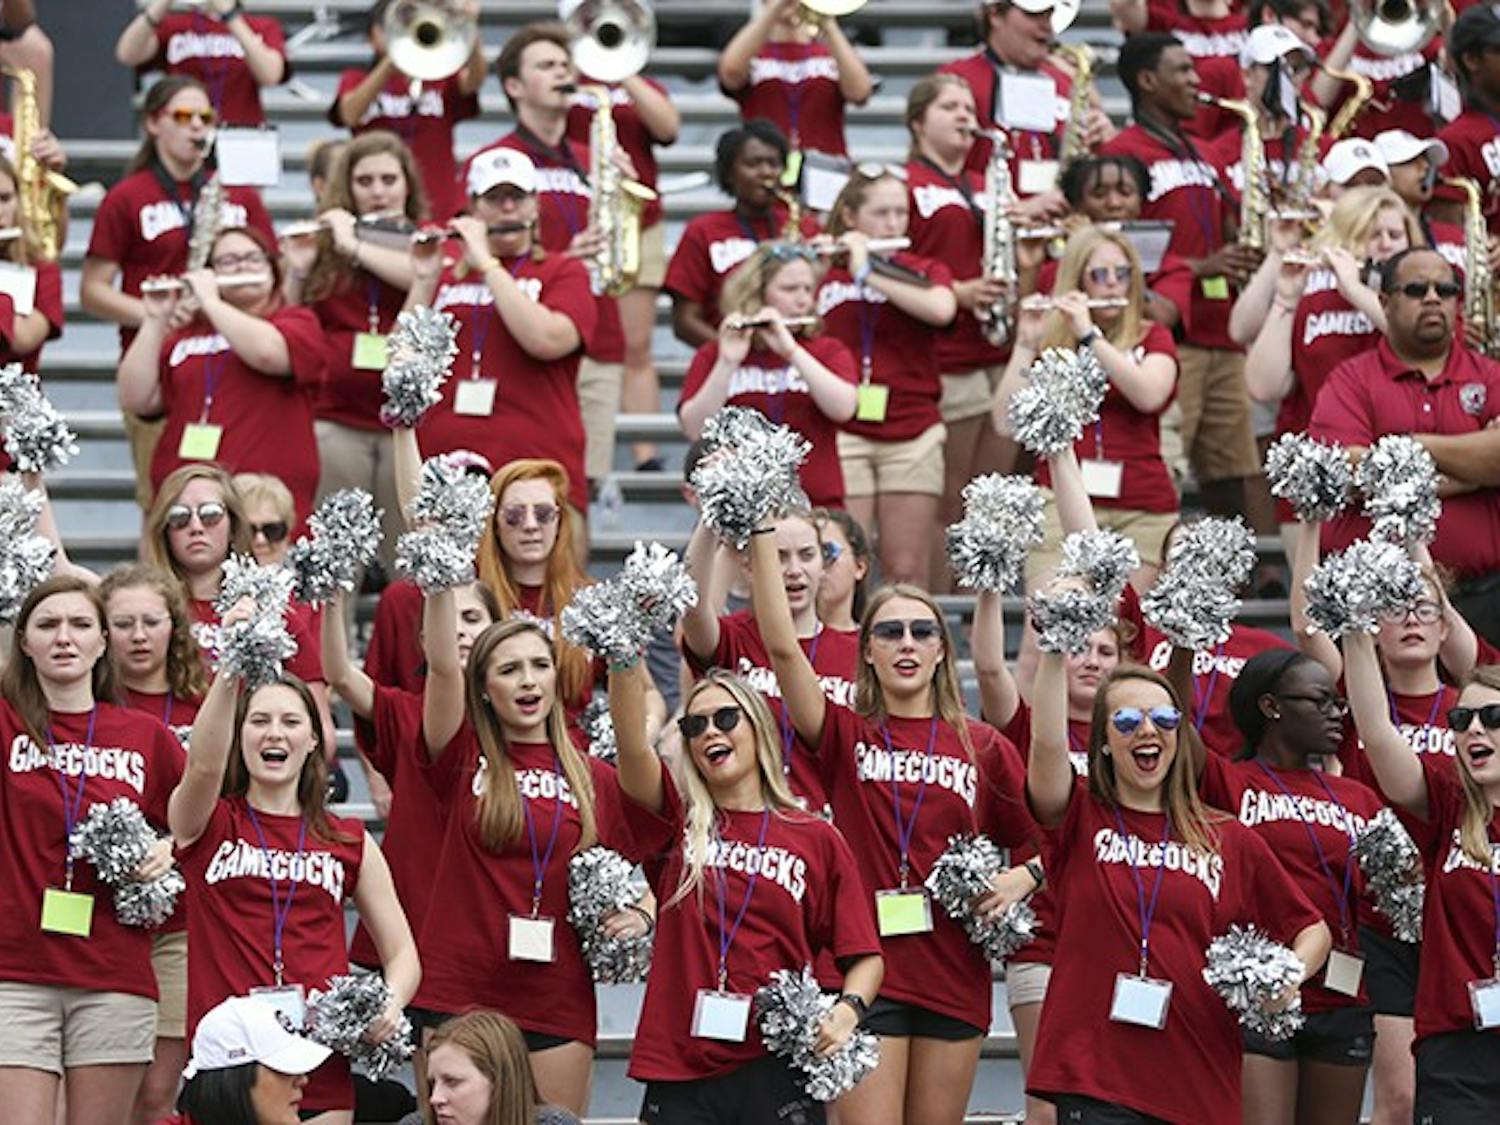 Gamecock band cheers during the spring game at Williams-Brice Stadium on Saturday.&nbsp;